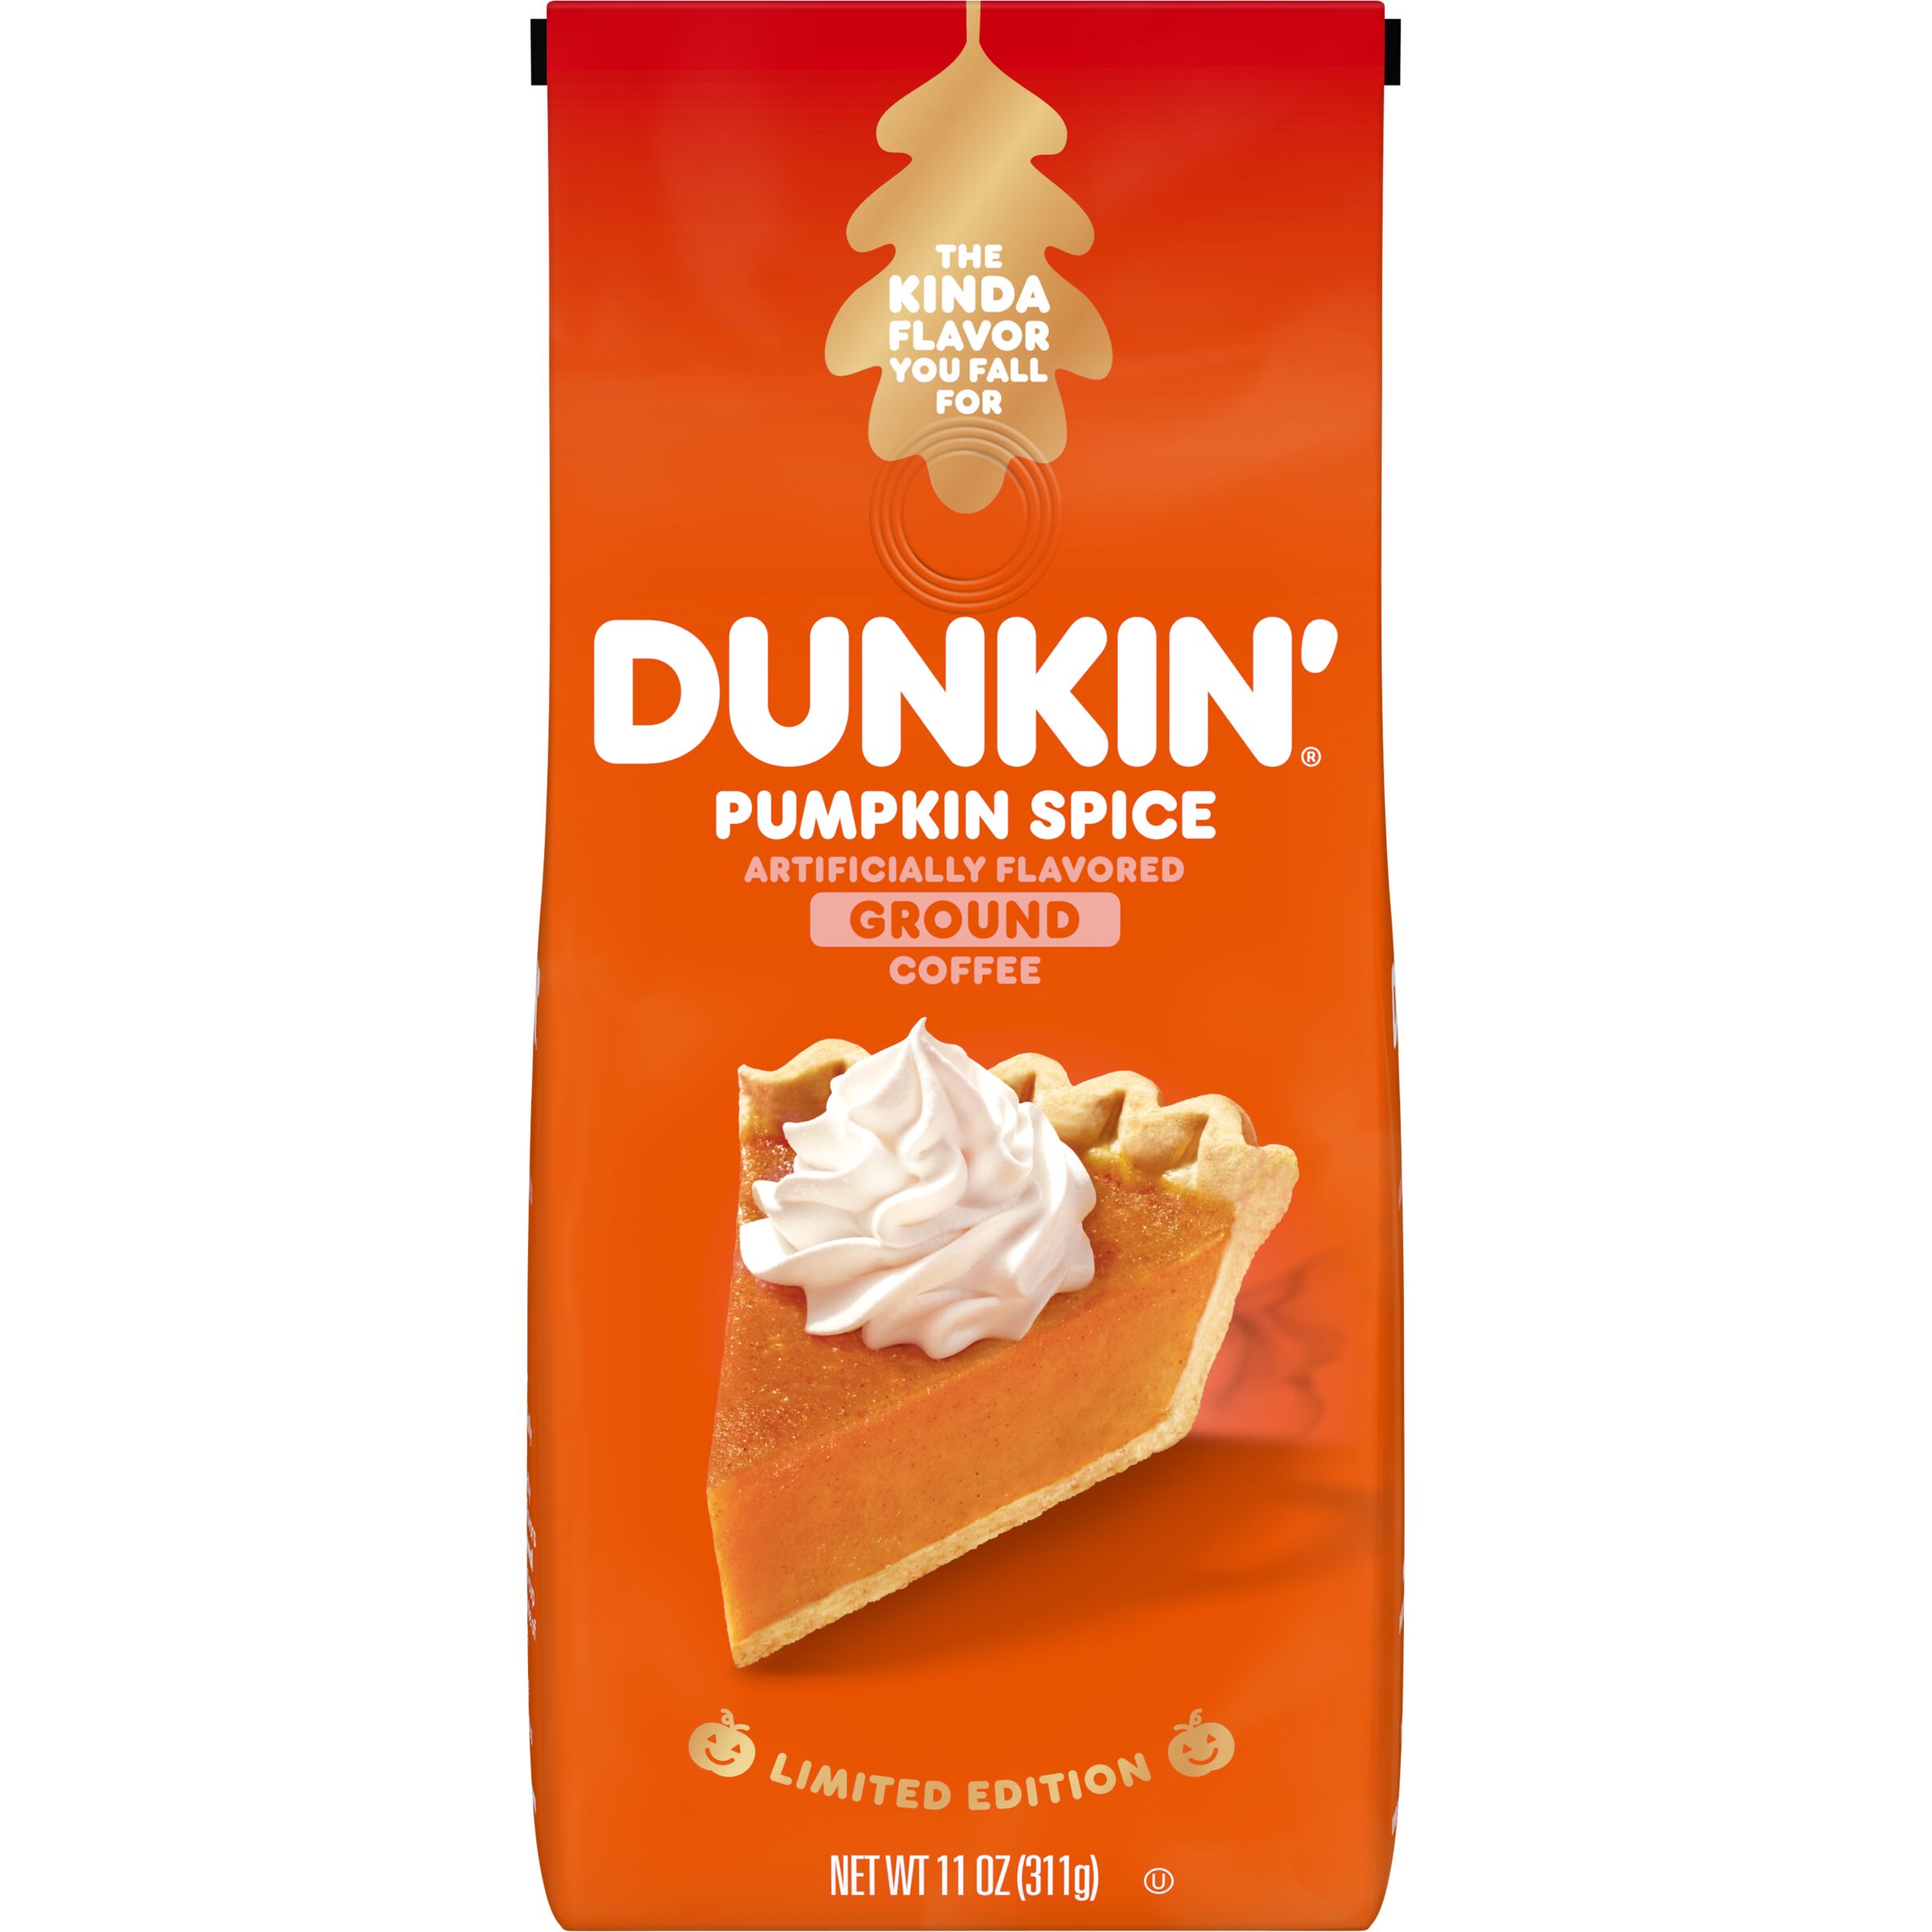 Dunkin Pumpkin Spice Ground Coffee, Limited Edition Fall Coffee, 11 oz. Bag - image 1 of 8